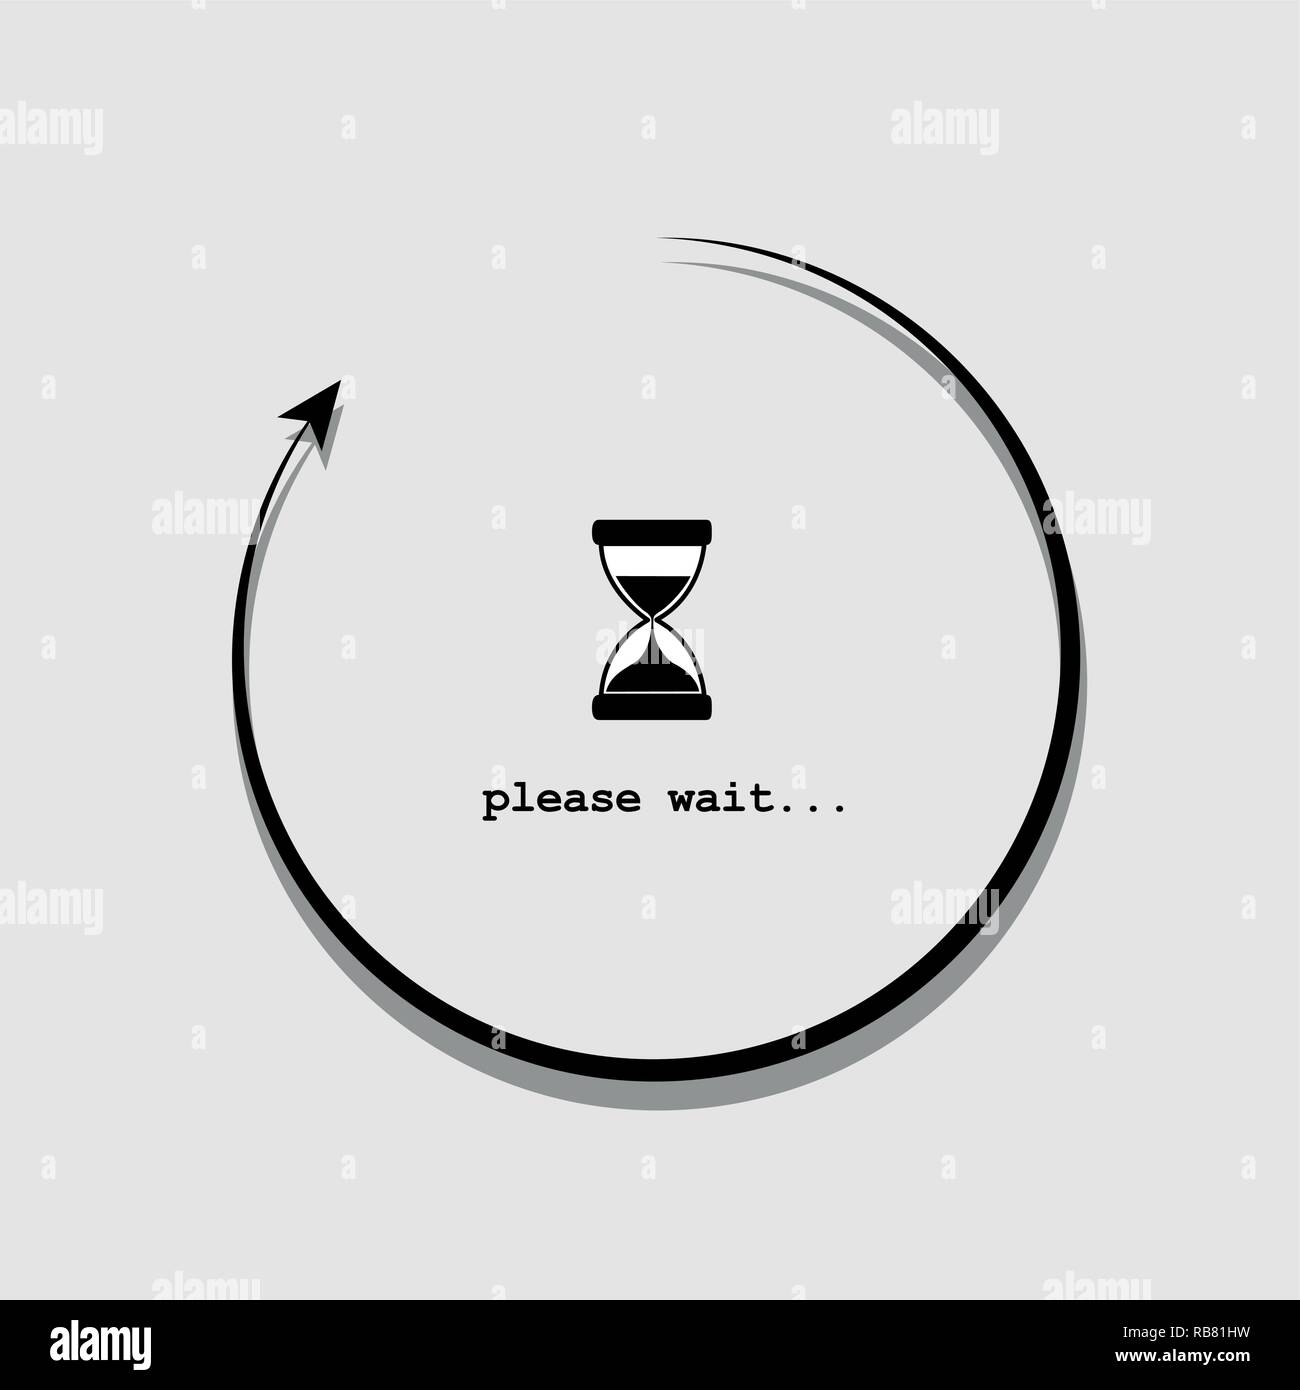 loading please wait infographic with hourglass in a circle vector illustration EPS10 Stock Vector